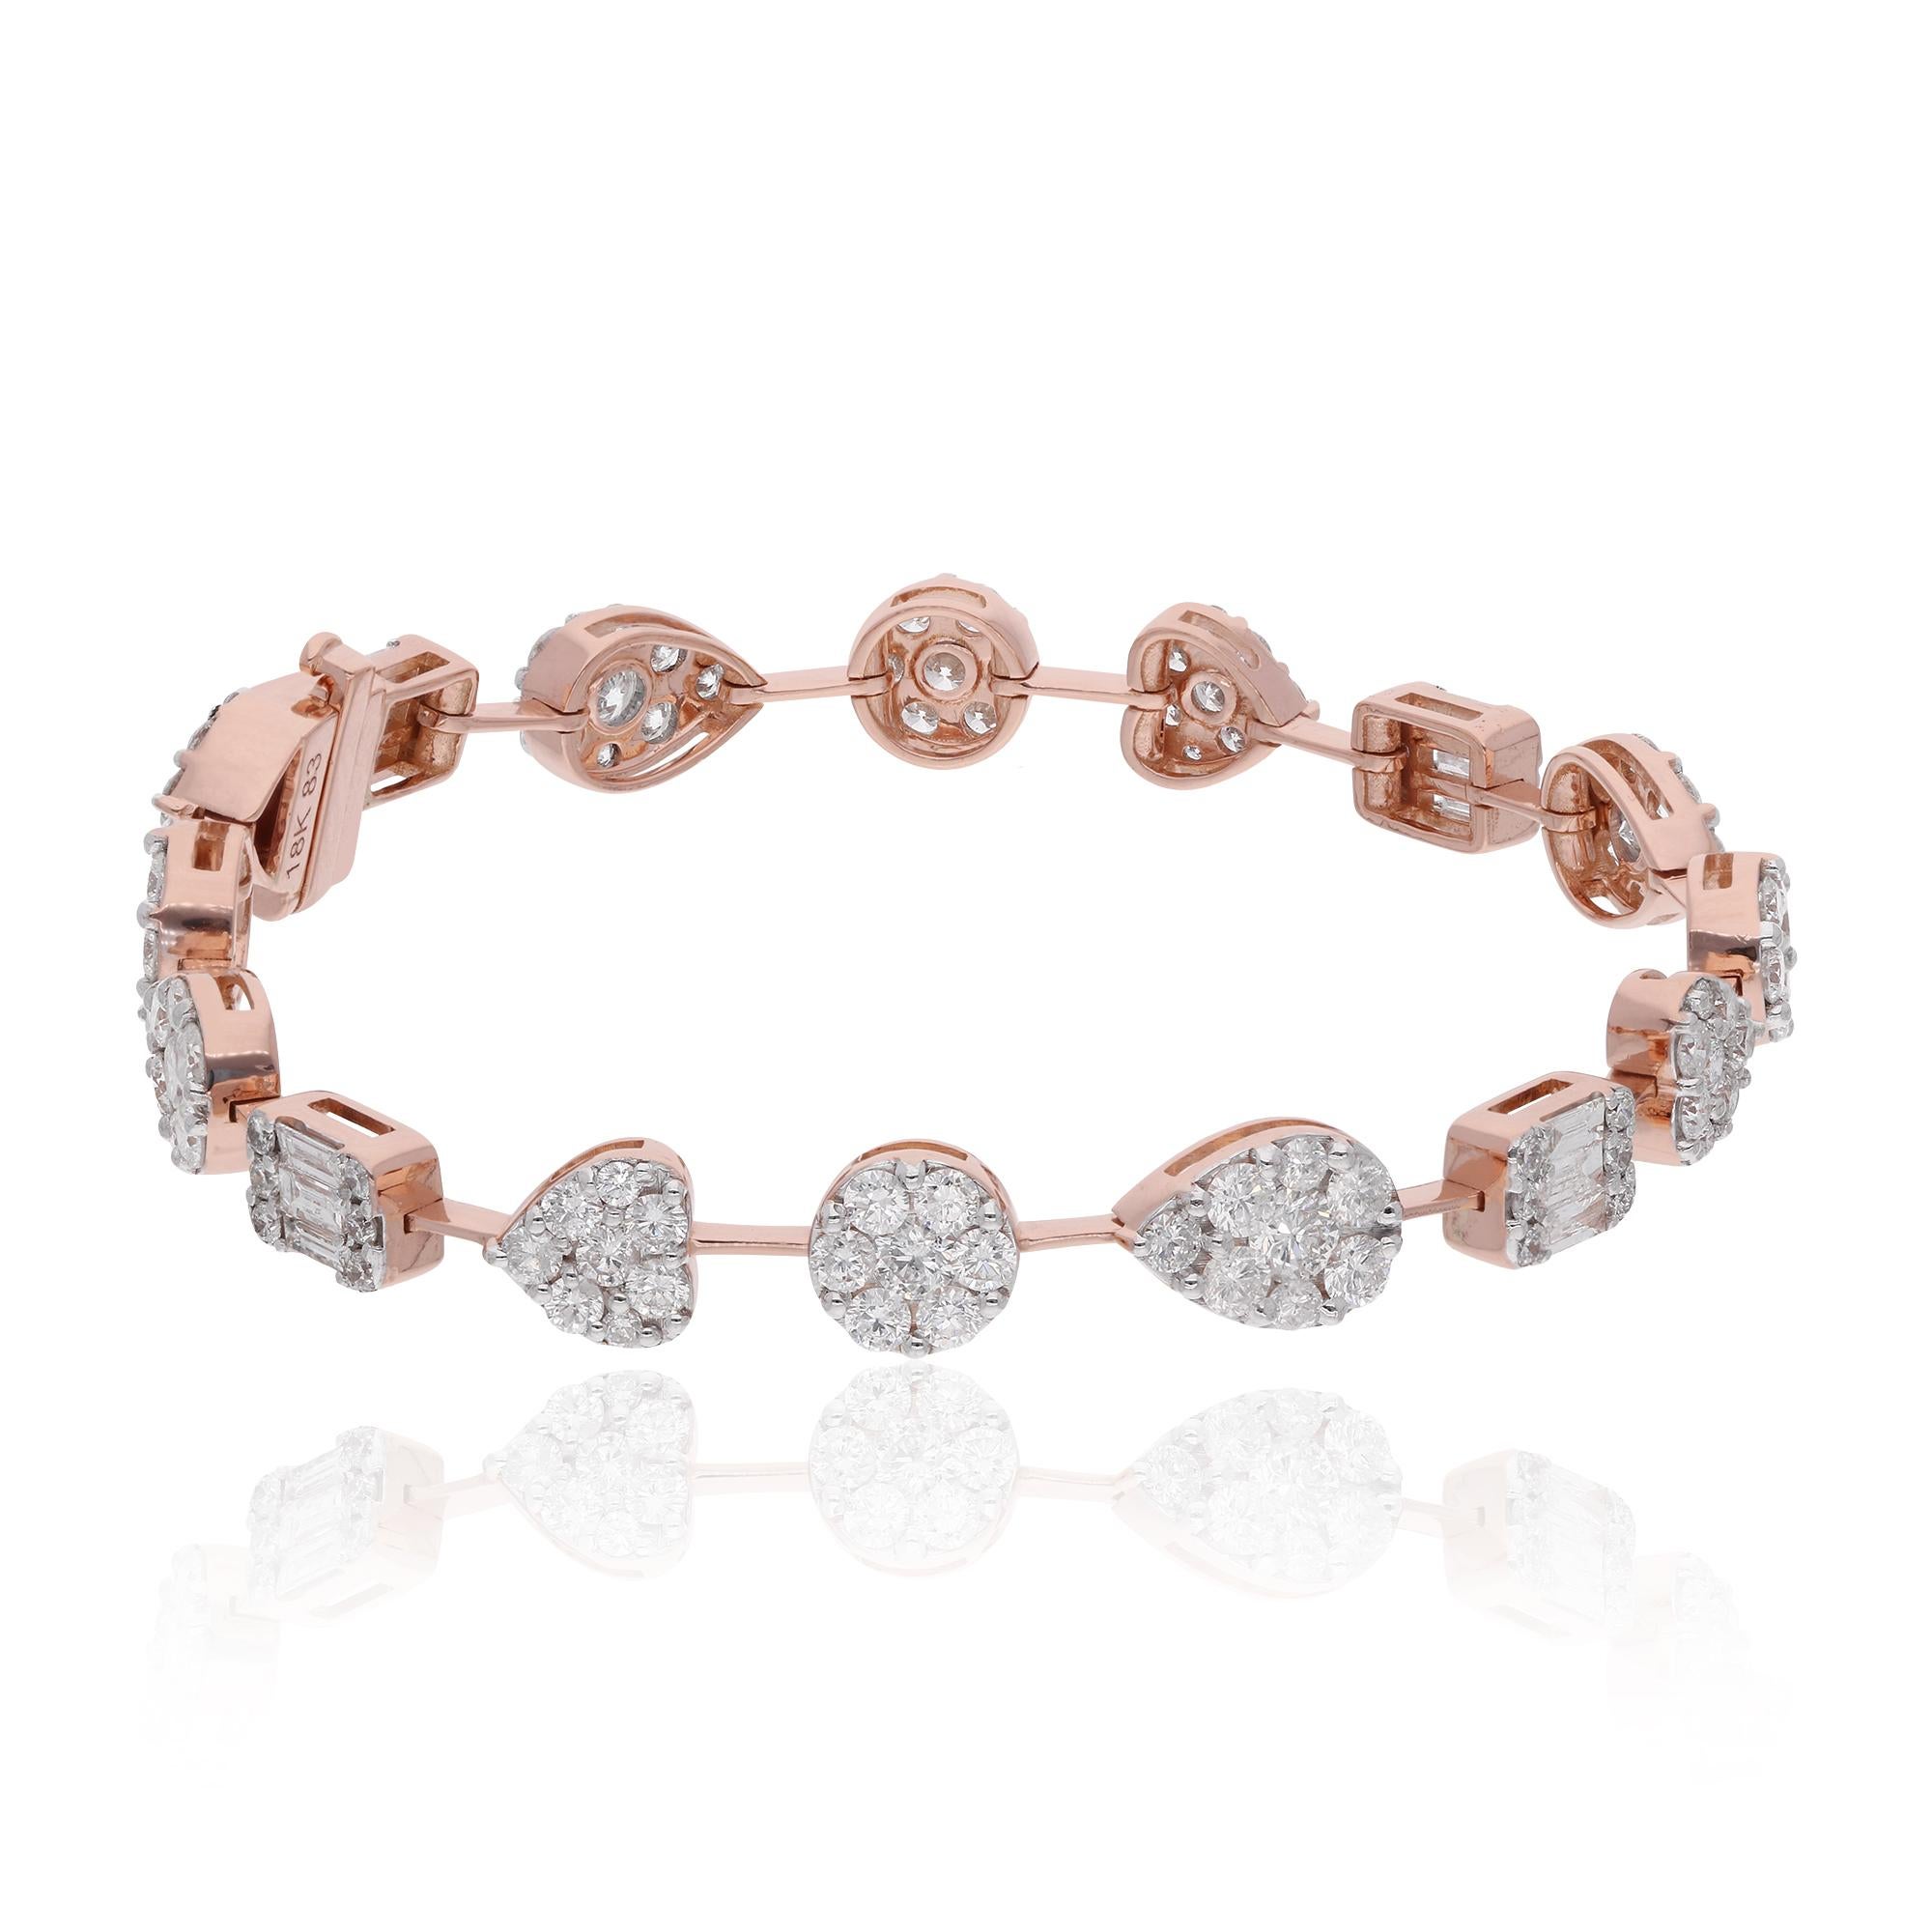 Item Code :- SEBR-43142B (14k)
Gross Wt. :- 11.44 gm
14k Solid Rose Gold Wt. :- 10.44 gm
Natural Diamond Wt. :- 5.00 Ct. ( AVERAGE DIAMOND CLARITY SI1-SI2 & COLOR H-I )
Bracelet Length :- 7 Inches Long

✦ Sizing
.....................
We can adjust